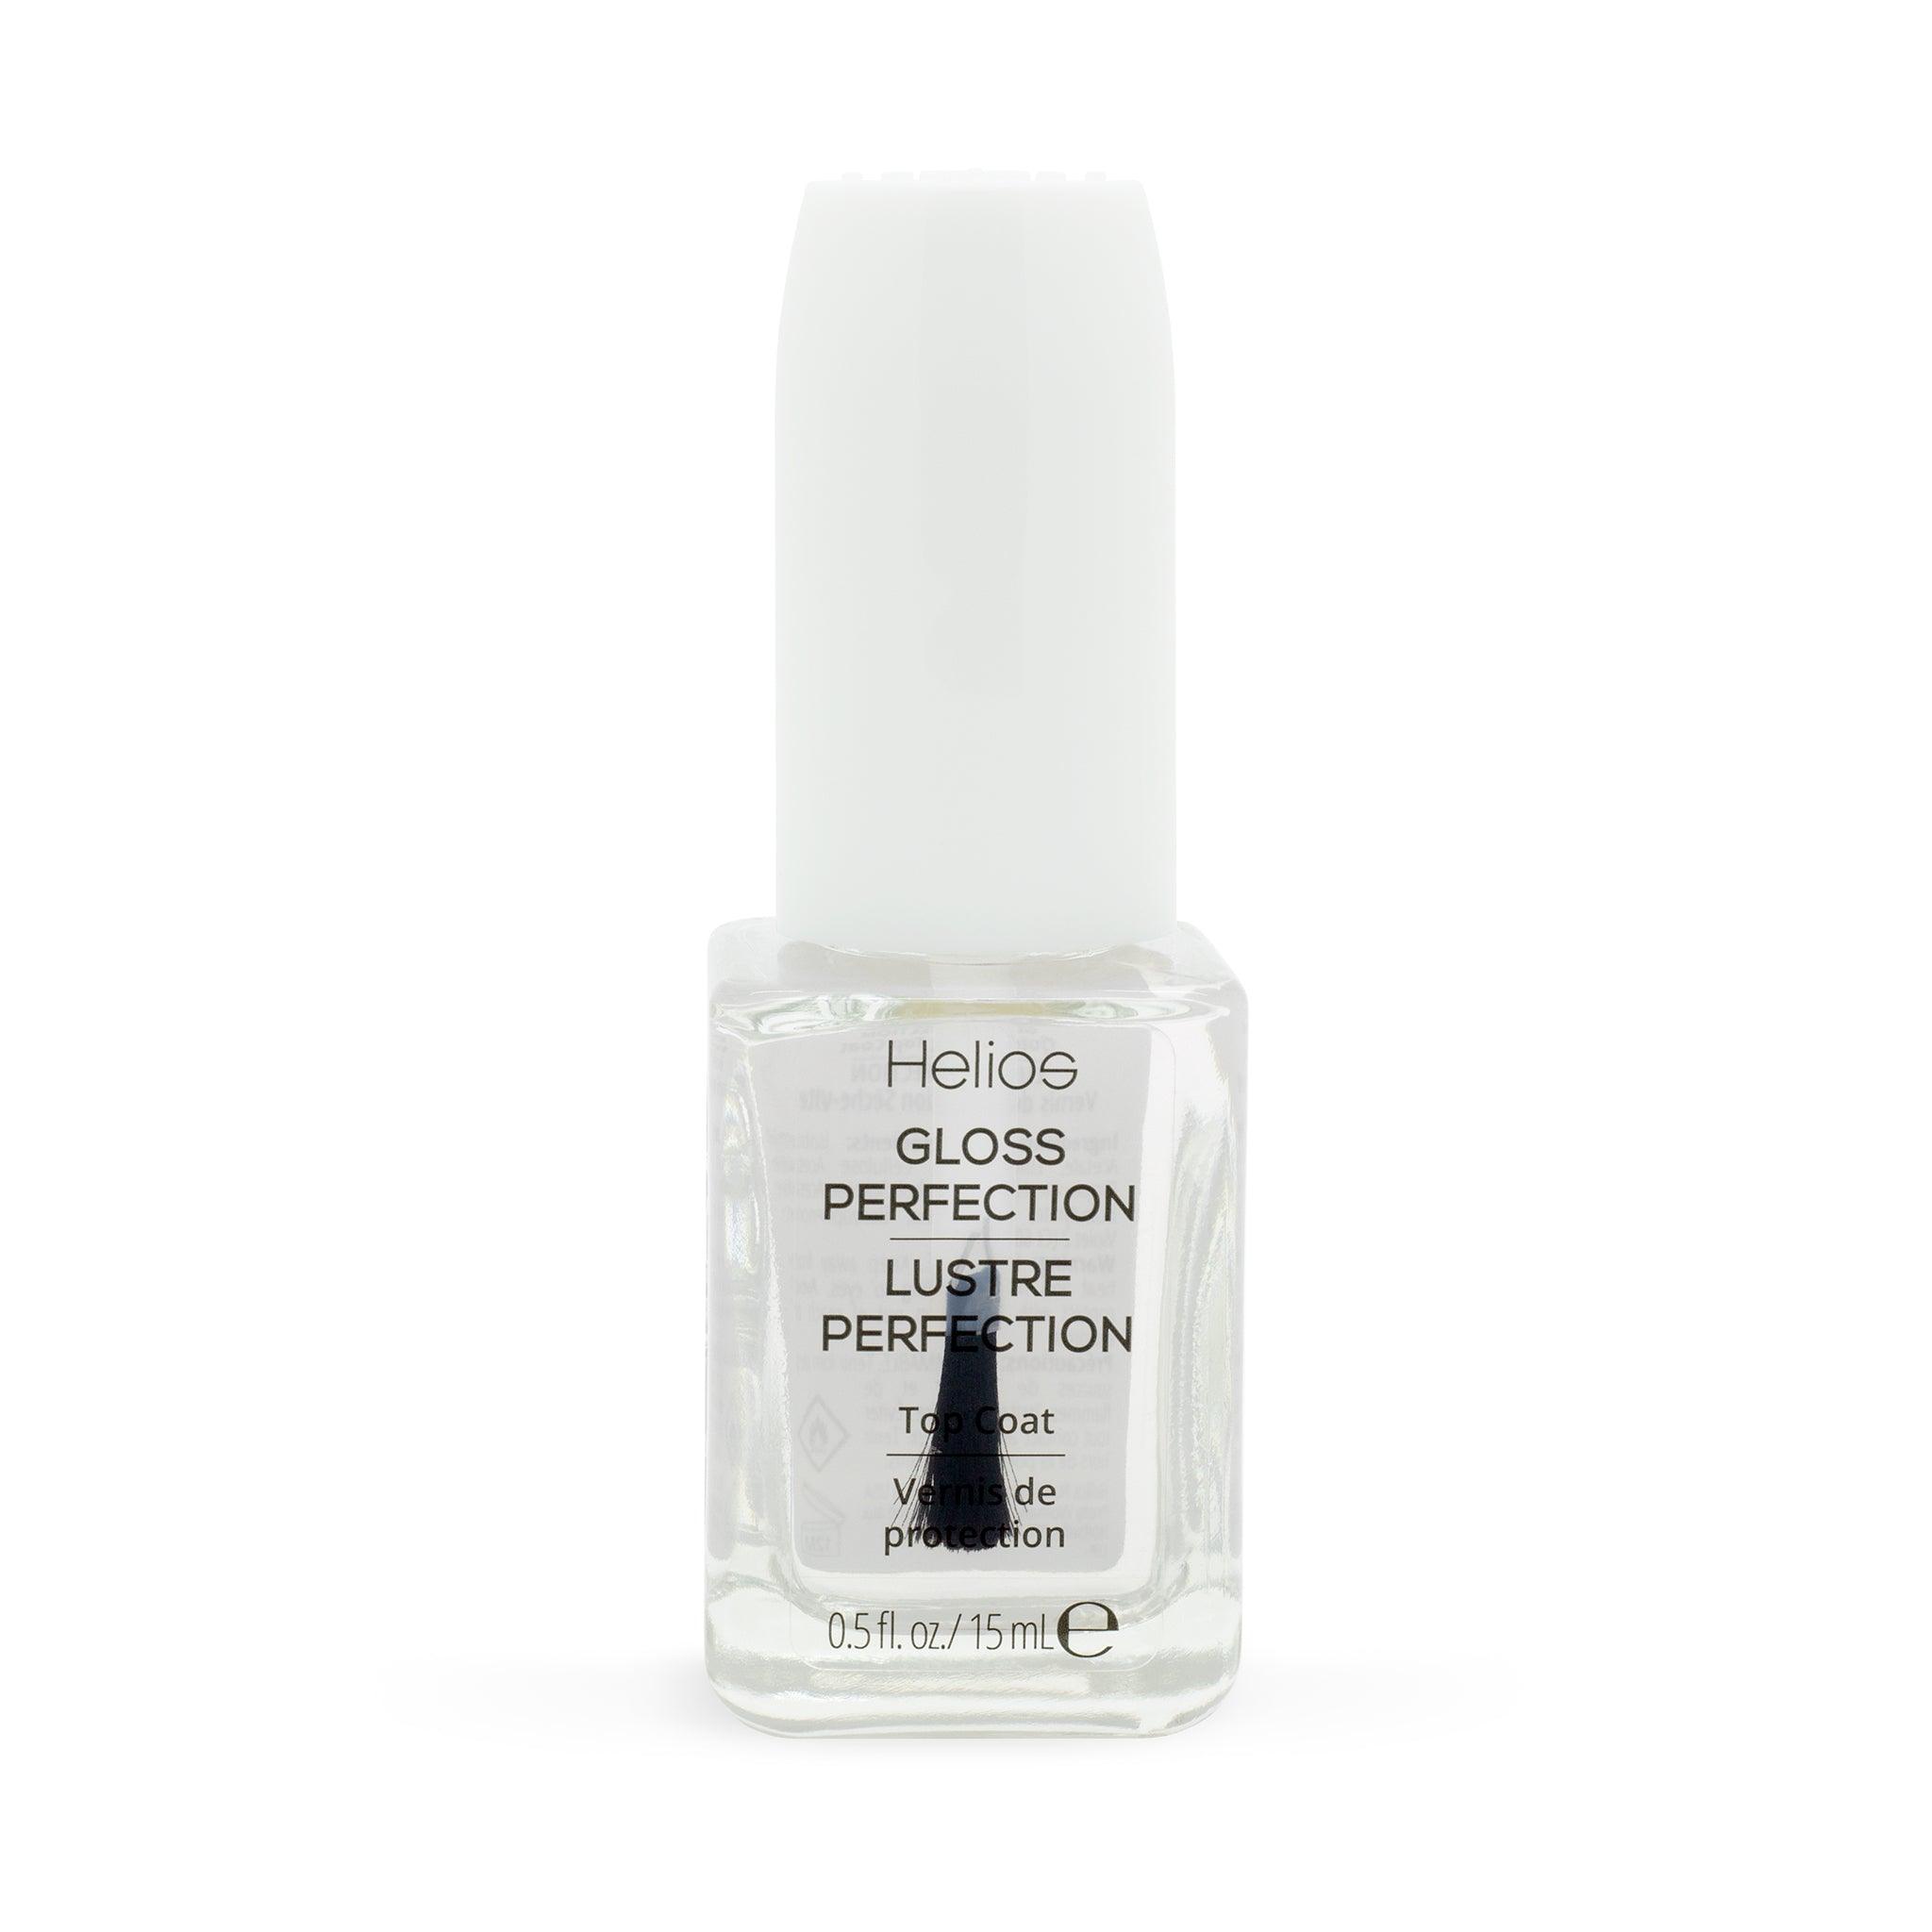 GLOSS PERFECTION QUICK-DRYING TOP COAT - Helios Nail Systems